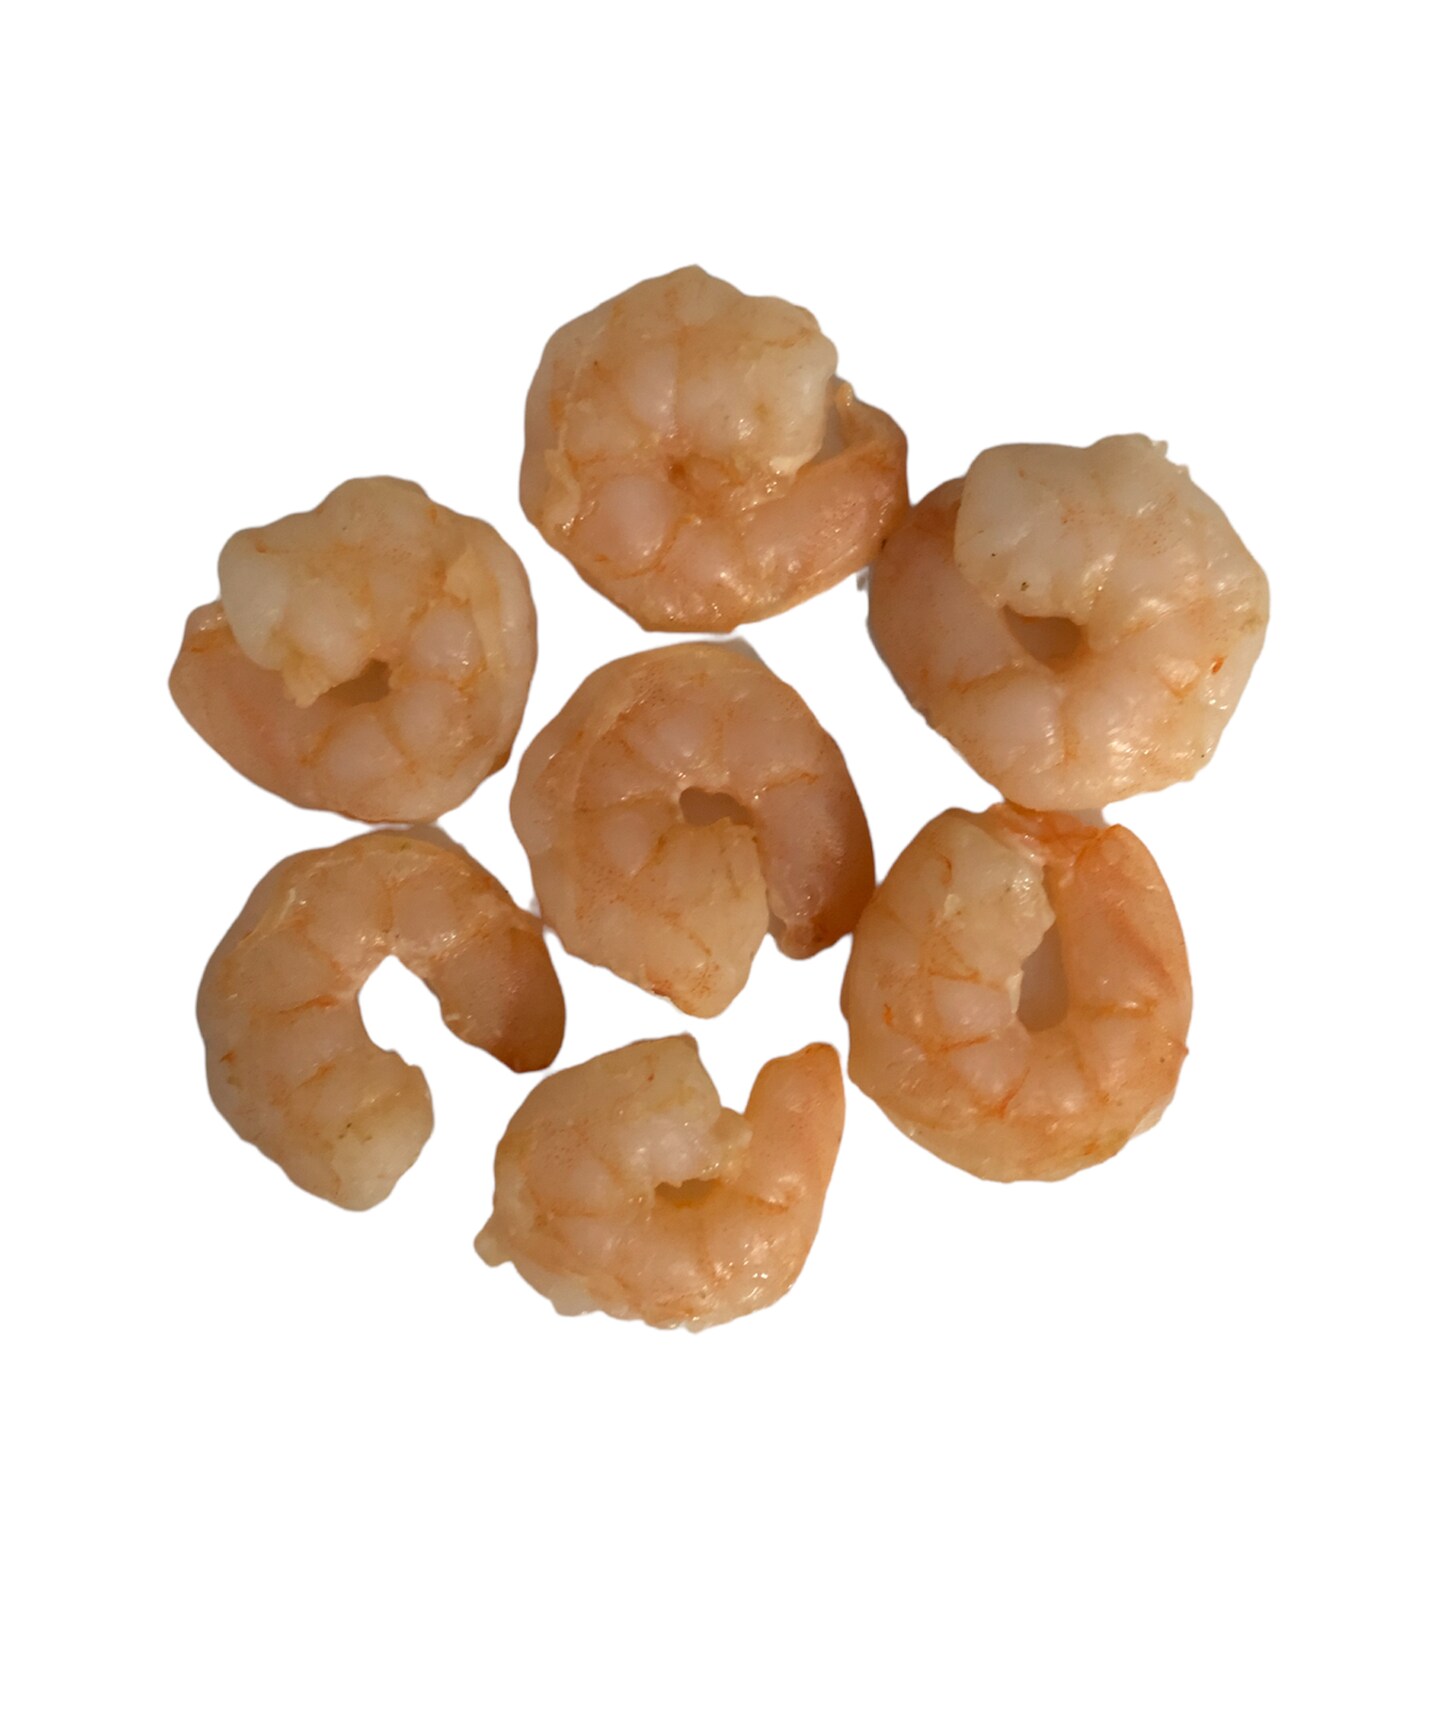  Shrimp mold 8 cavities Seafood animals silicone mold wax melts  molds NC053 : עבודת יד